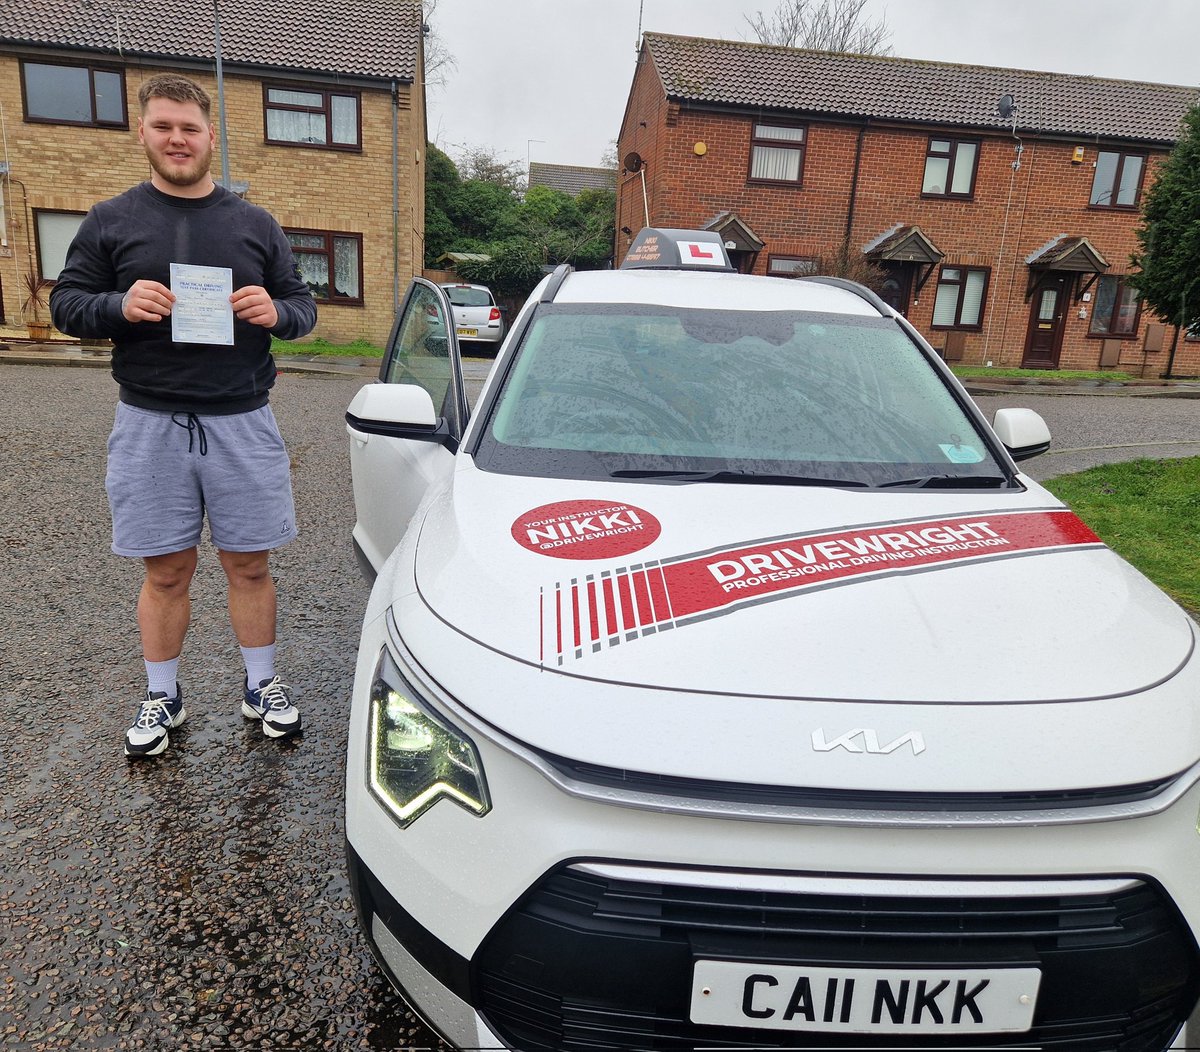 Whooo Hoooo- its a FIRST TIME test pass for Josh Masters!
Much love 
Nik x 
#LearnRightwithDriveWright 
#NKK  #Automatic #Manual #Drivinglessons  #FemaleInstructor #NikkisSquad #SquadGoals  #Lowestoft #Thisgirlcan #Thisgirldid #SidTheStonic #NevTheNiro #Followthecar  #LoveMyJob